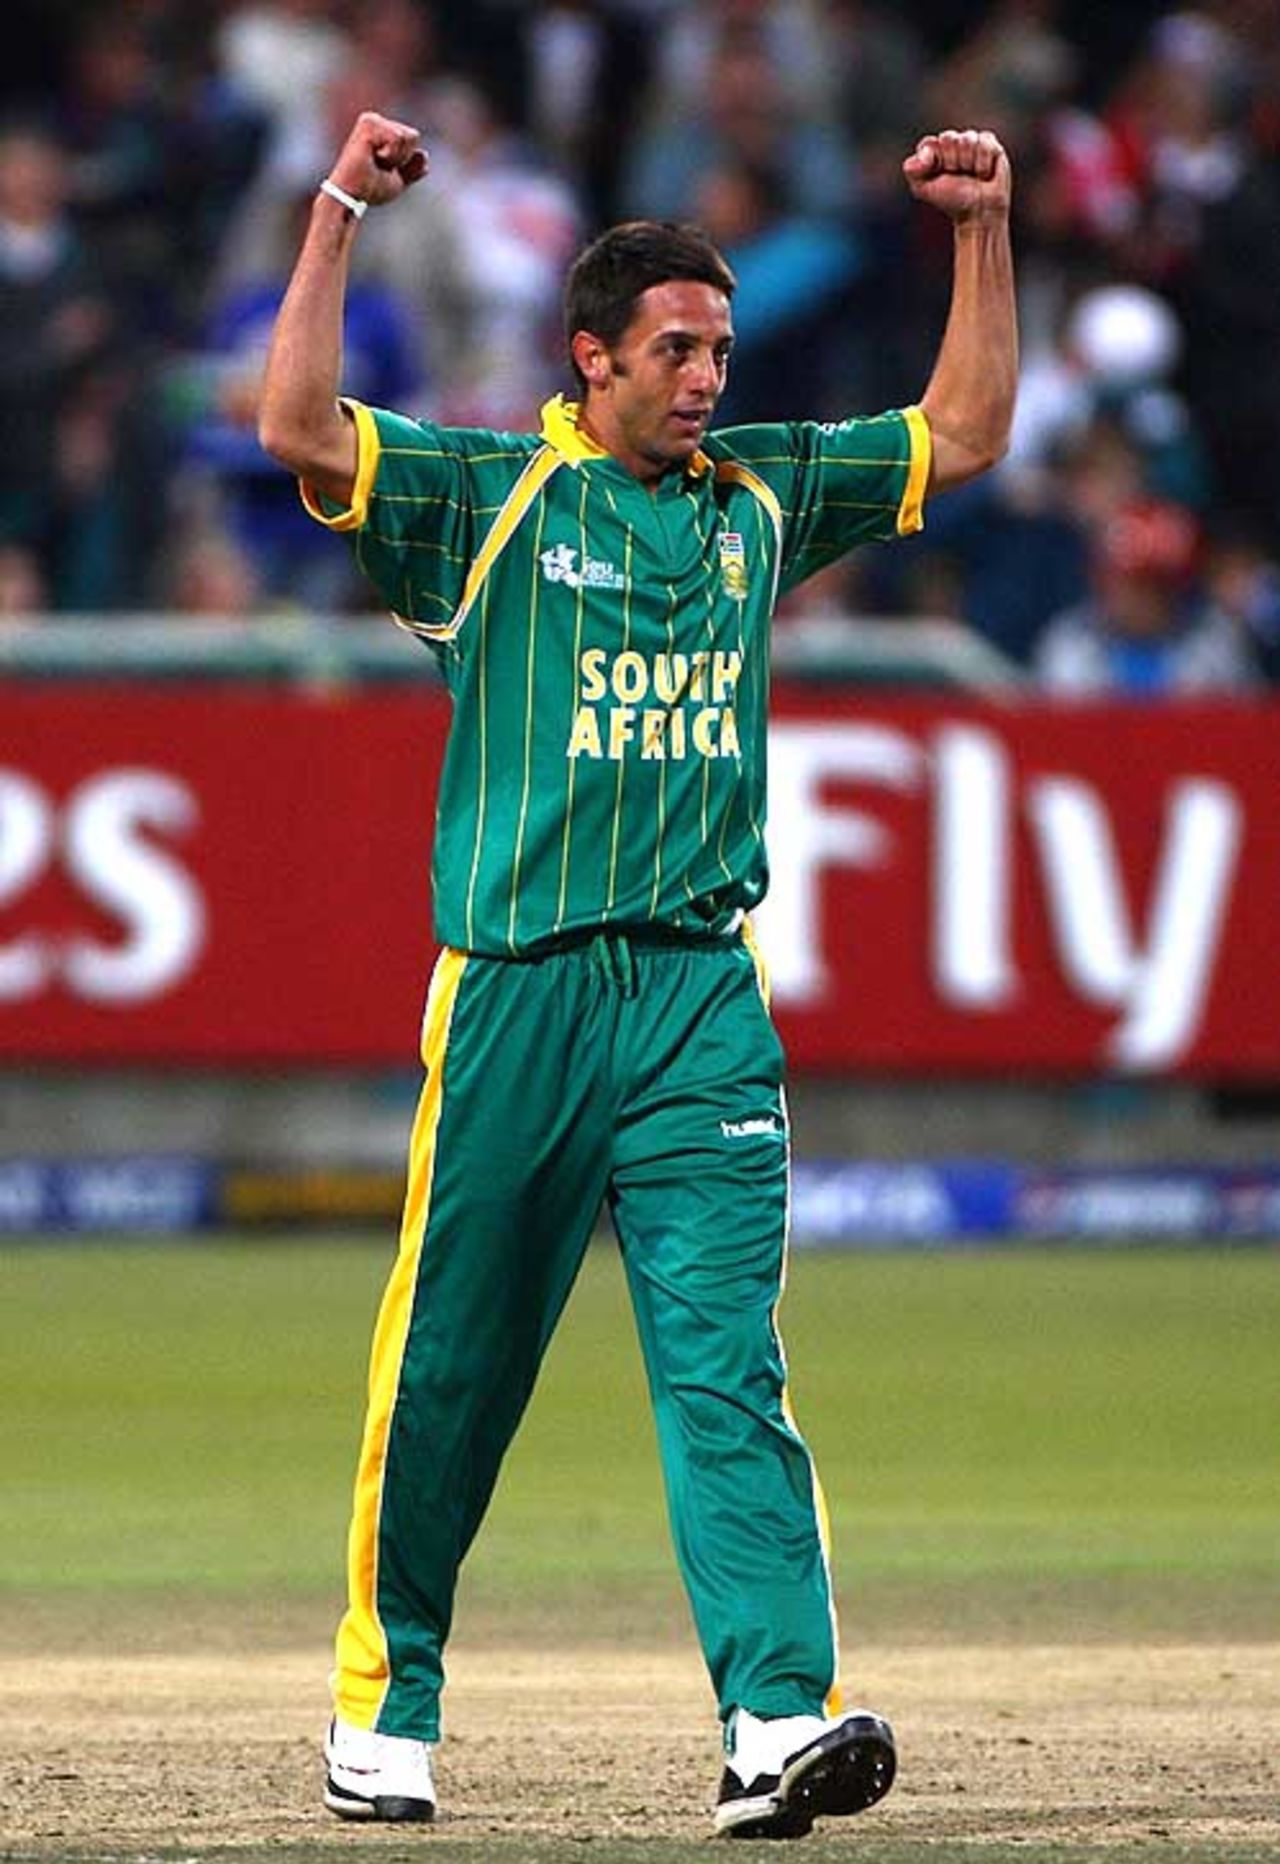 Johan van der Wath conceded 13 runs from his four overs, South Africa v Bangladesh, Group A, ICC World Twenty20, Cape Town, September 15, 2007 